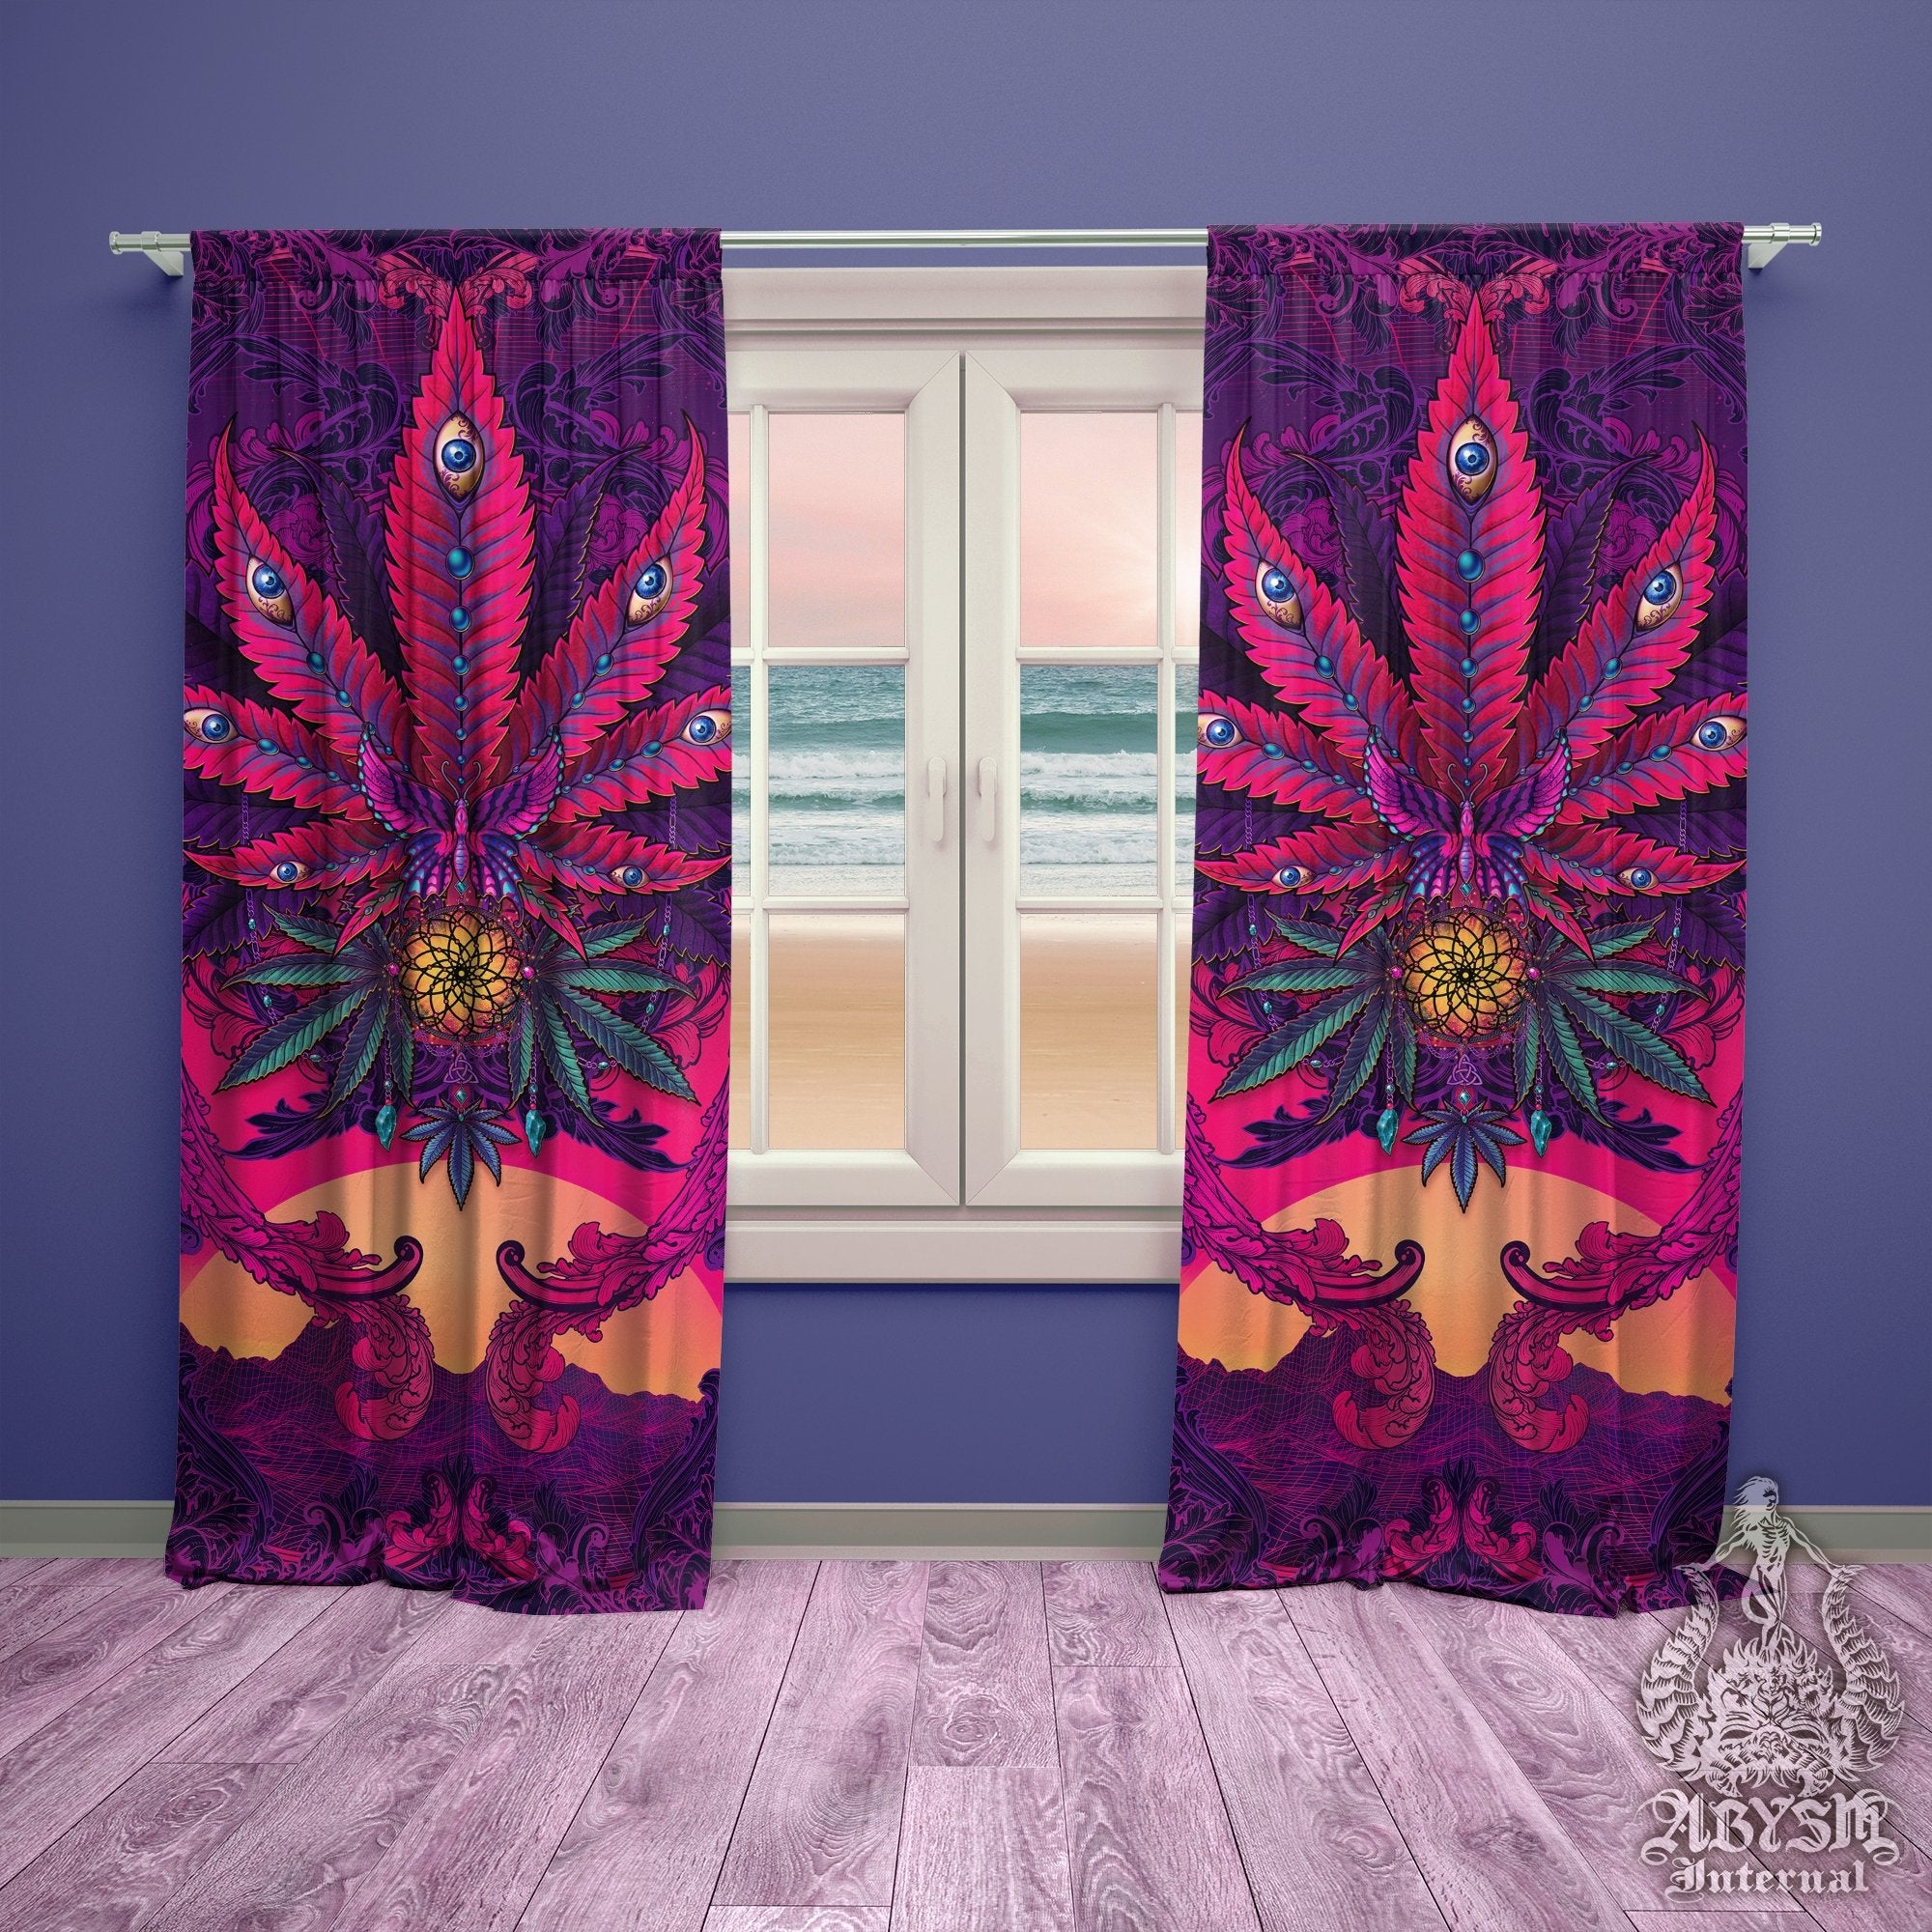 Vaporwave Weed Blackout Curtains, Cannabis Shop Decor, Long Window Panels, Psychedelic Print, 420 Room Art, 80s Synthwave and Retrowave - Abysm Internal